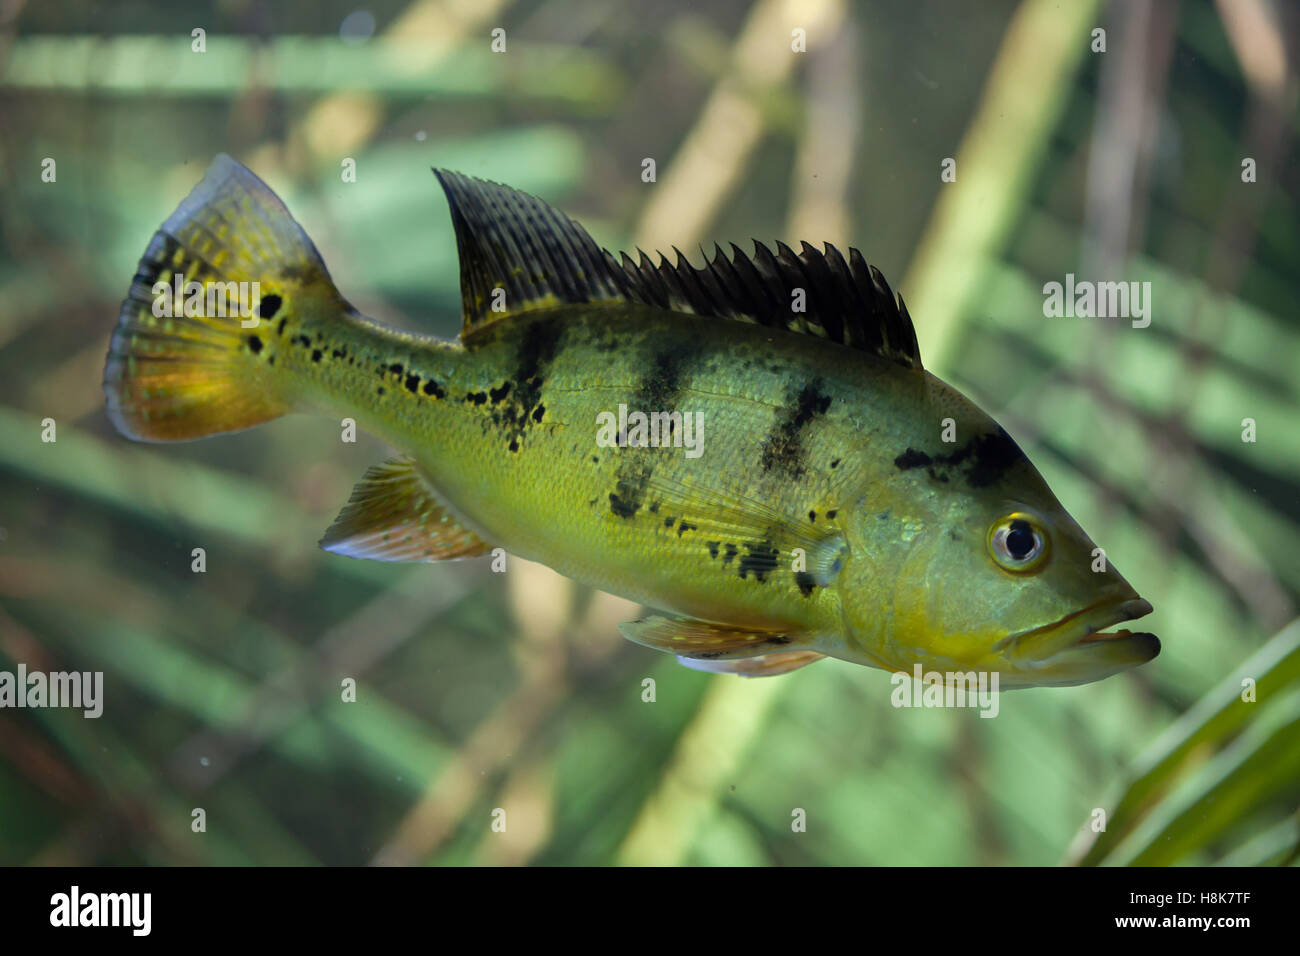 Butterfly peacock bass (Cichla ocellaris). Stock Photo